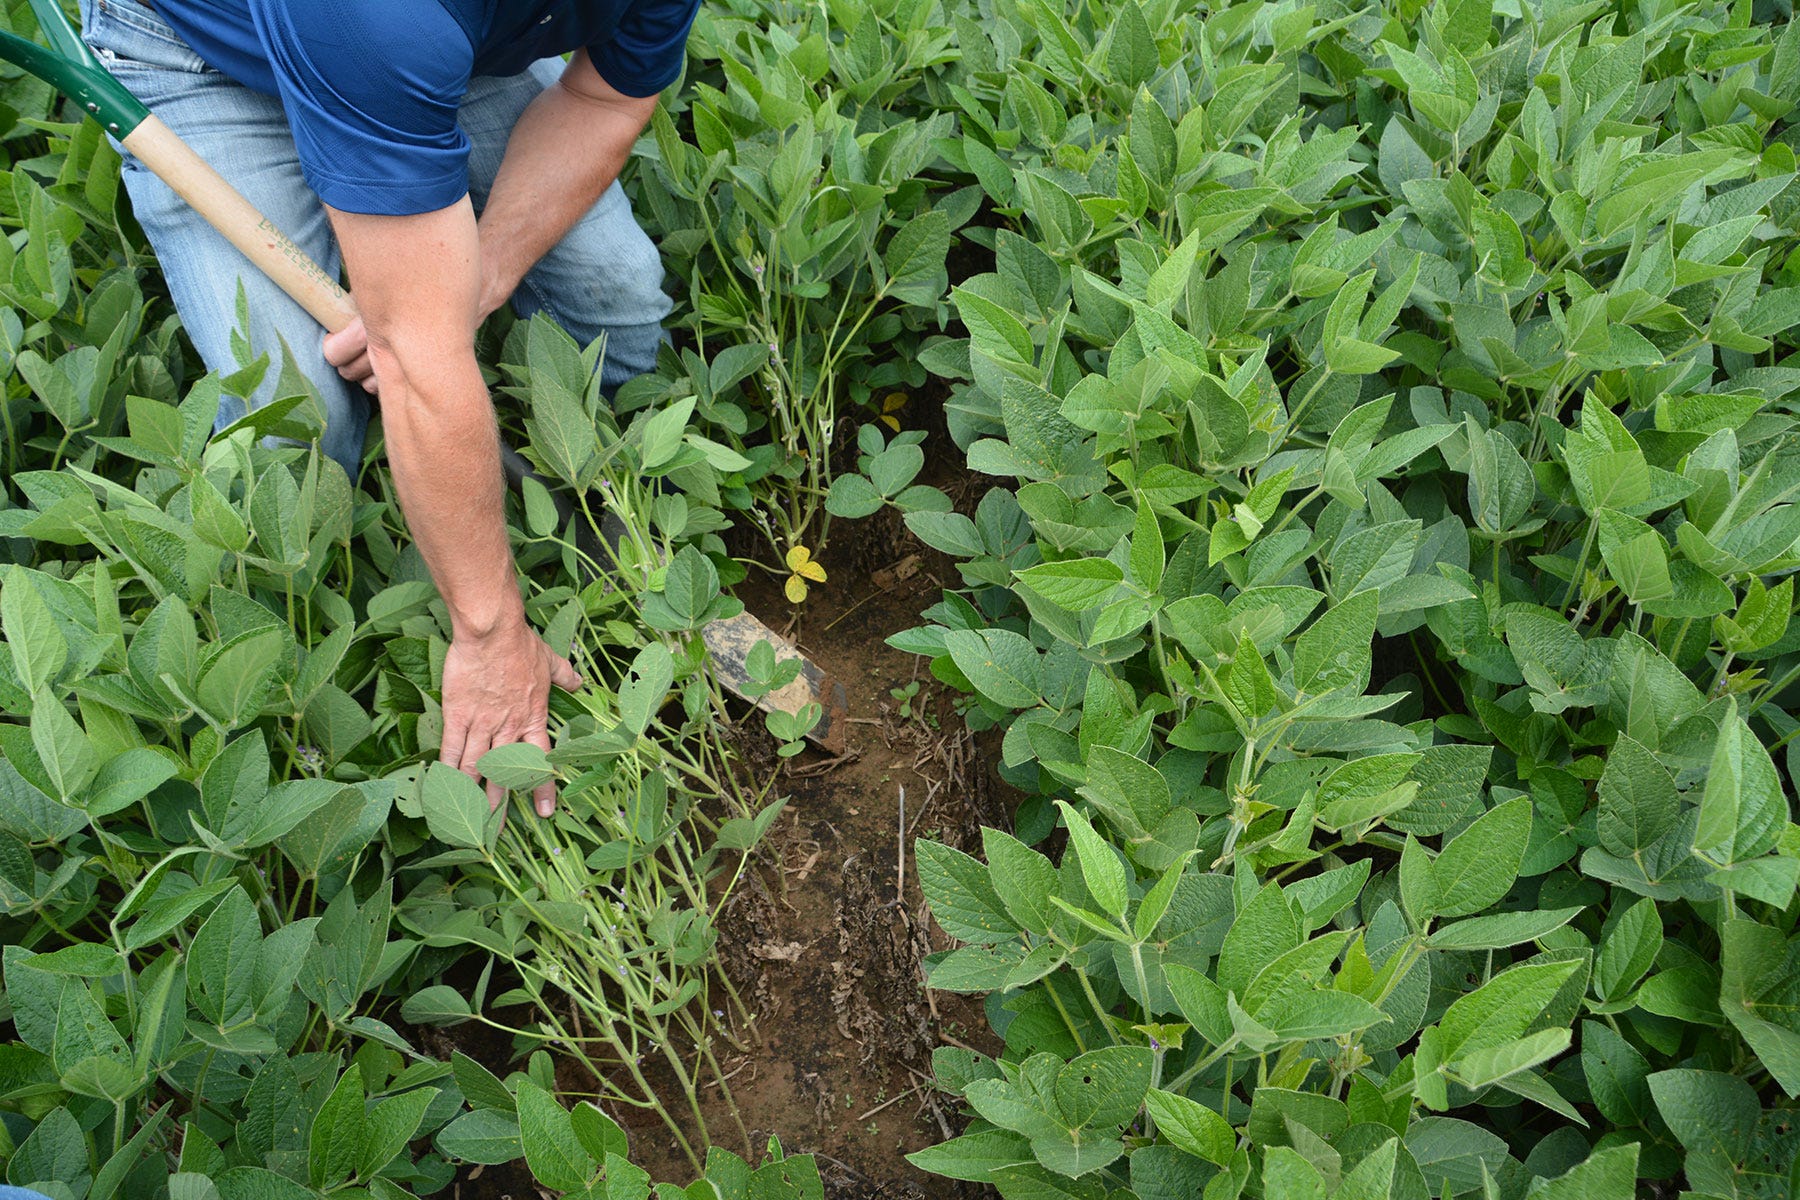 person pulling back soybean plants in the field